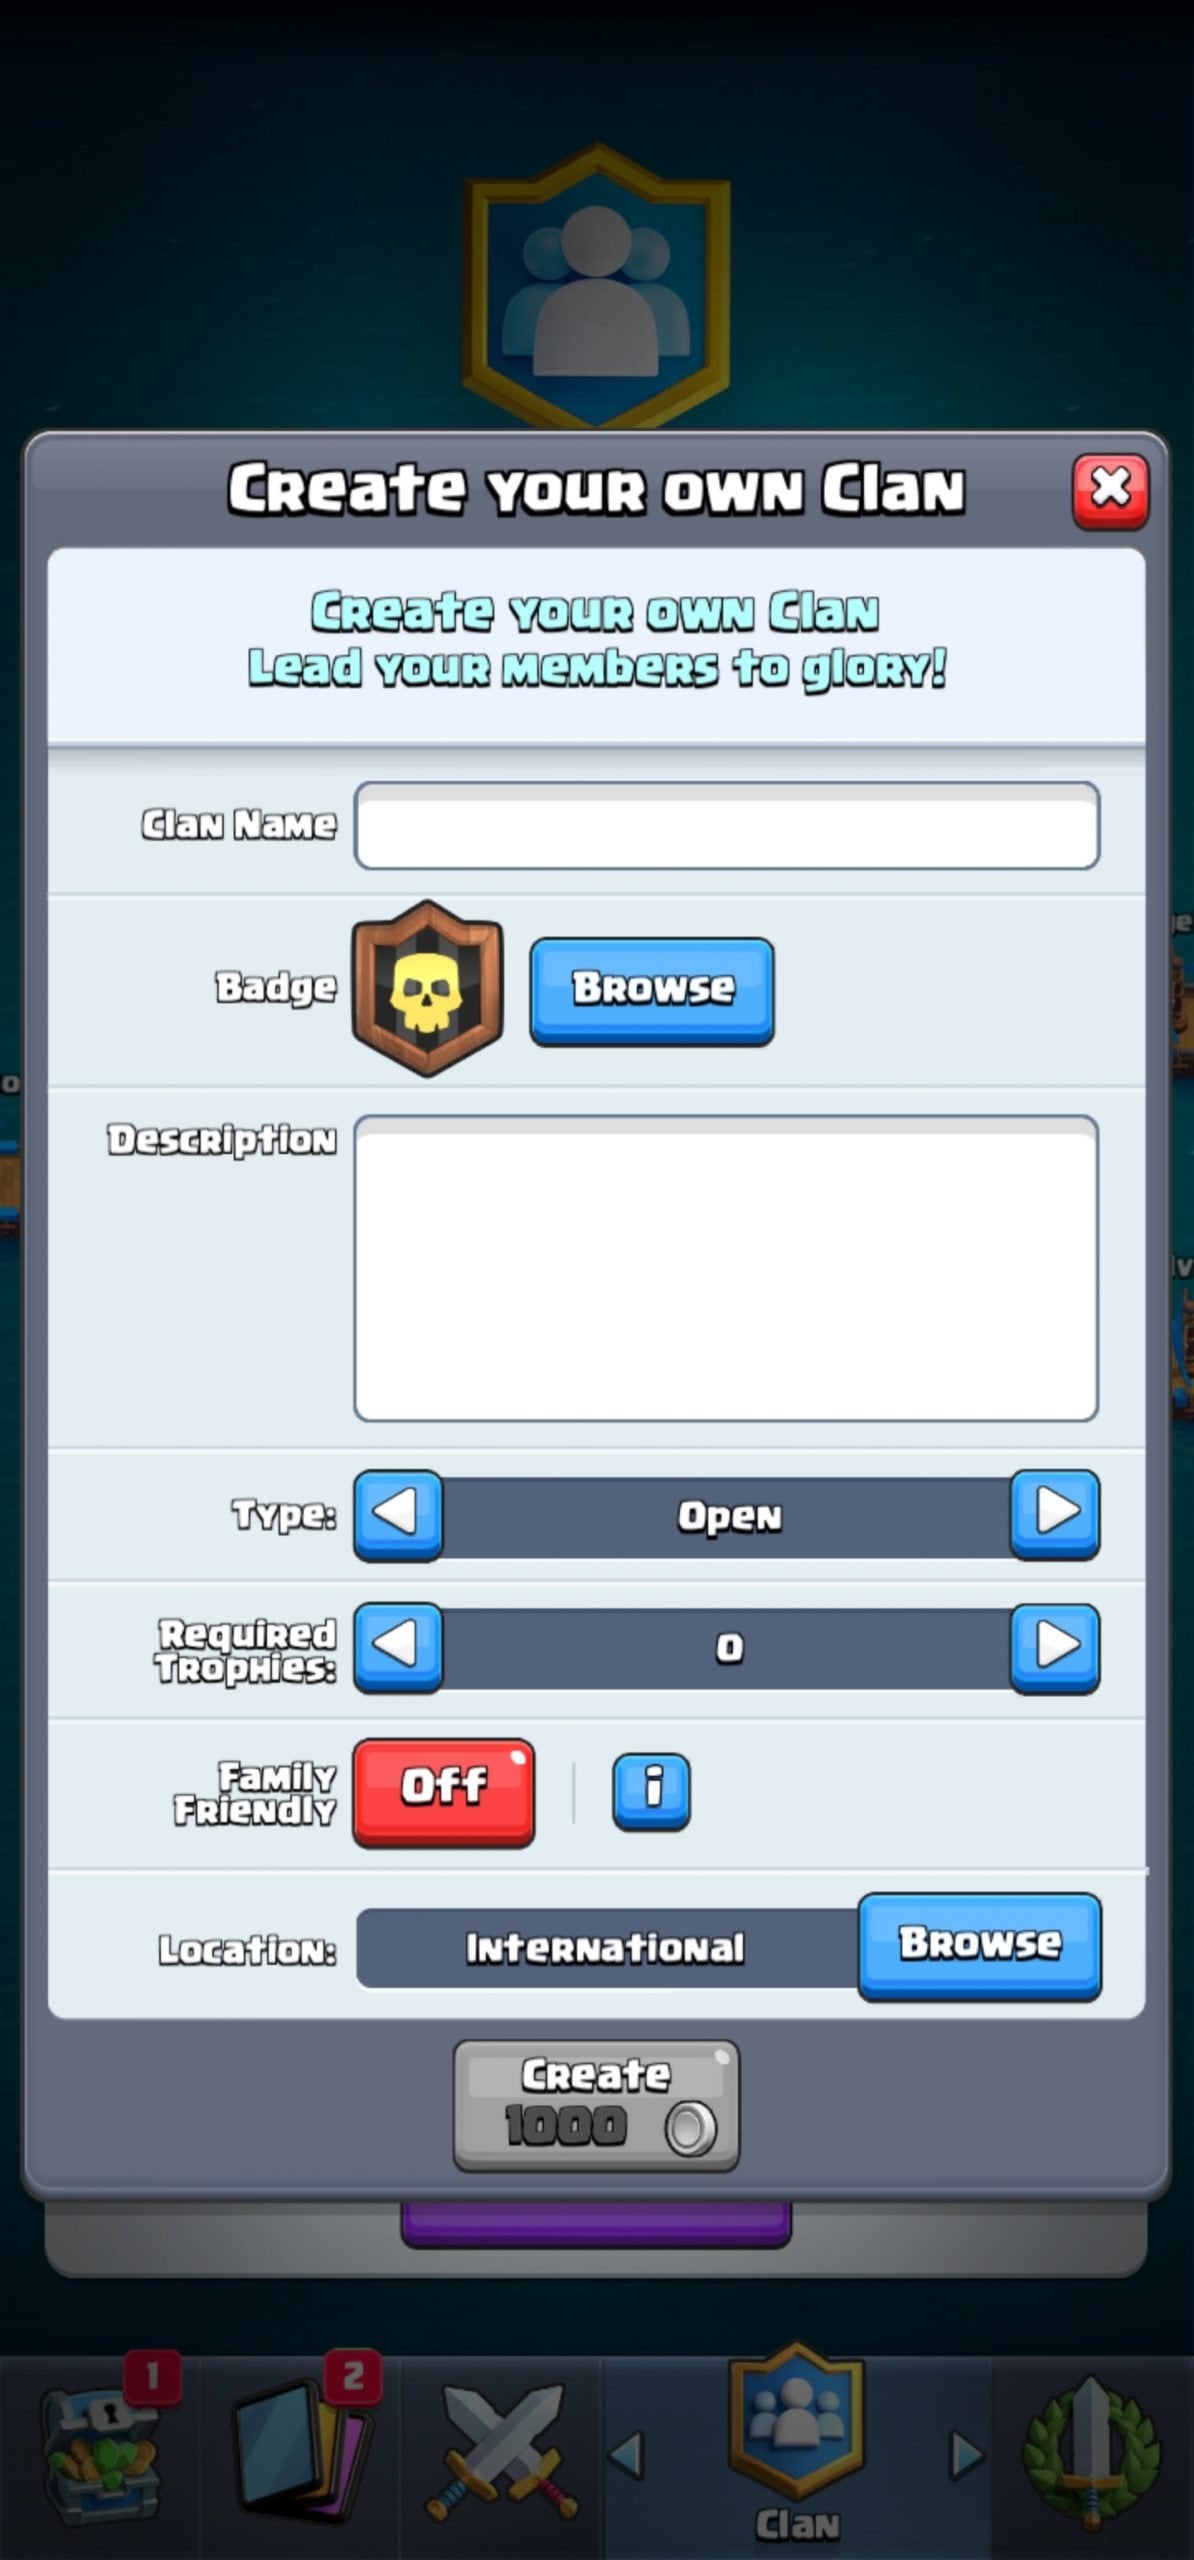 The clan creation screen in the mobile game Clash Royale.